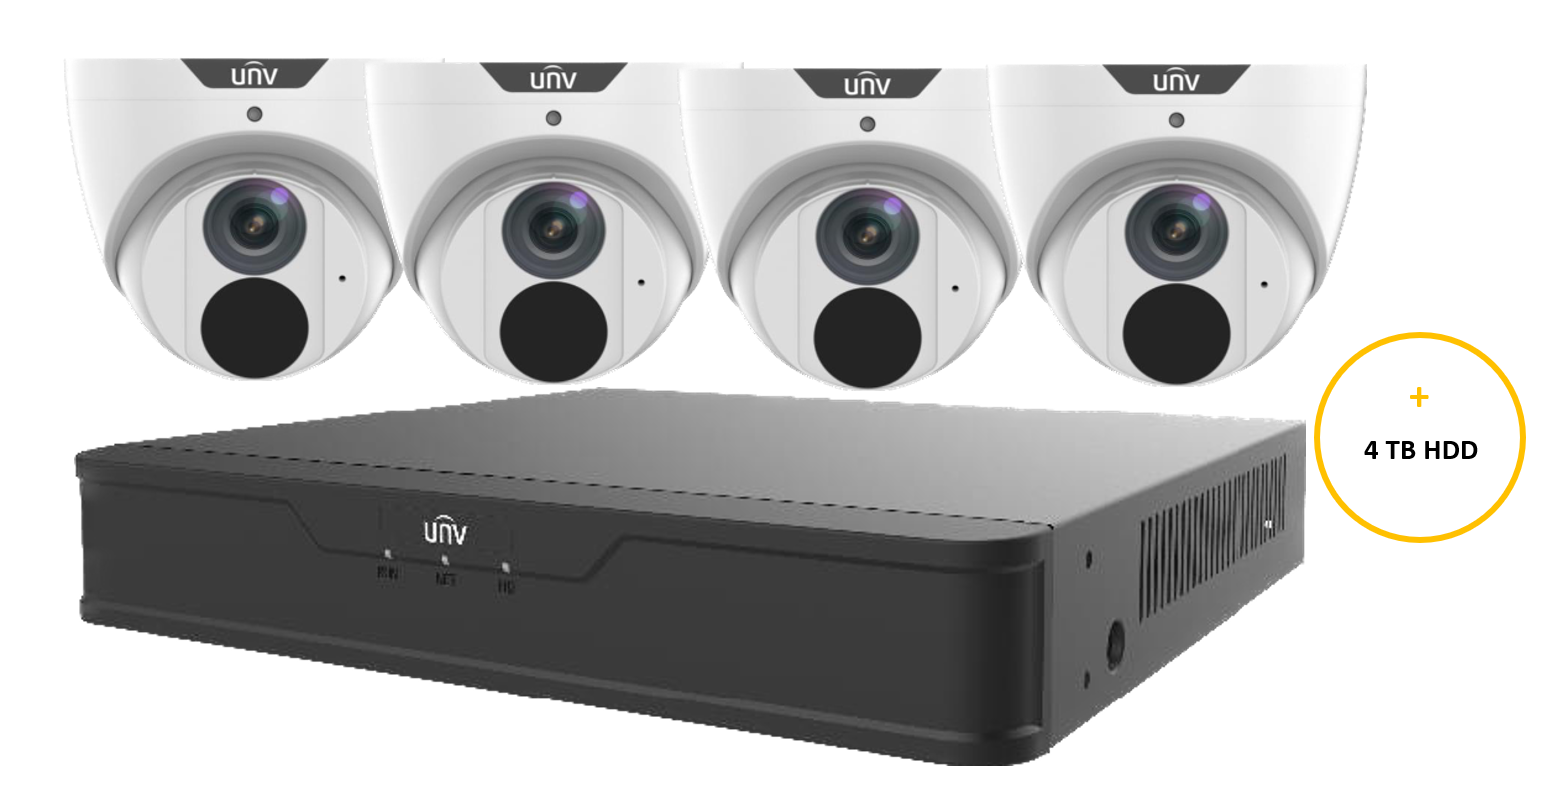 UNIVIEW PRIME-1 KIT INCLUDES 4 x 8MP WHITE PRIME-1 TURRET CAMERAS 2.8MM (UNVIPC3618SB-ADF28KM-I0) 4 CHANNEL BLACK NVR (UNVNVR501-04B-P4) NON EXPANDABLE HDD WITH 4TB HDD NOT LOADED